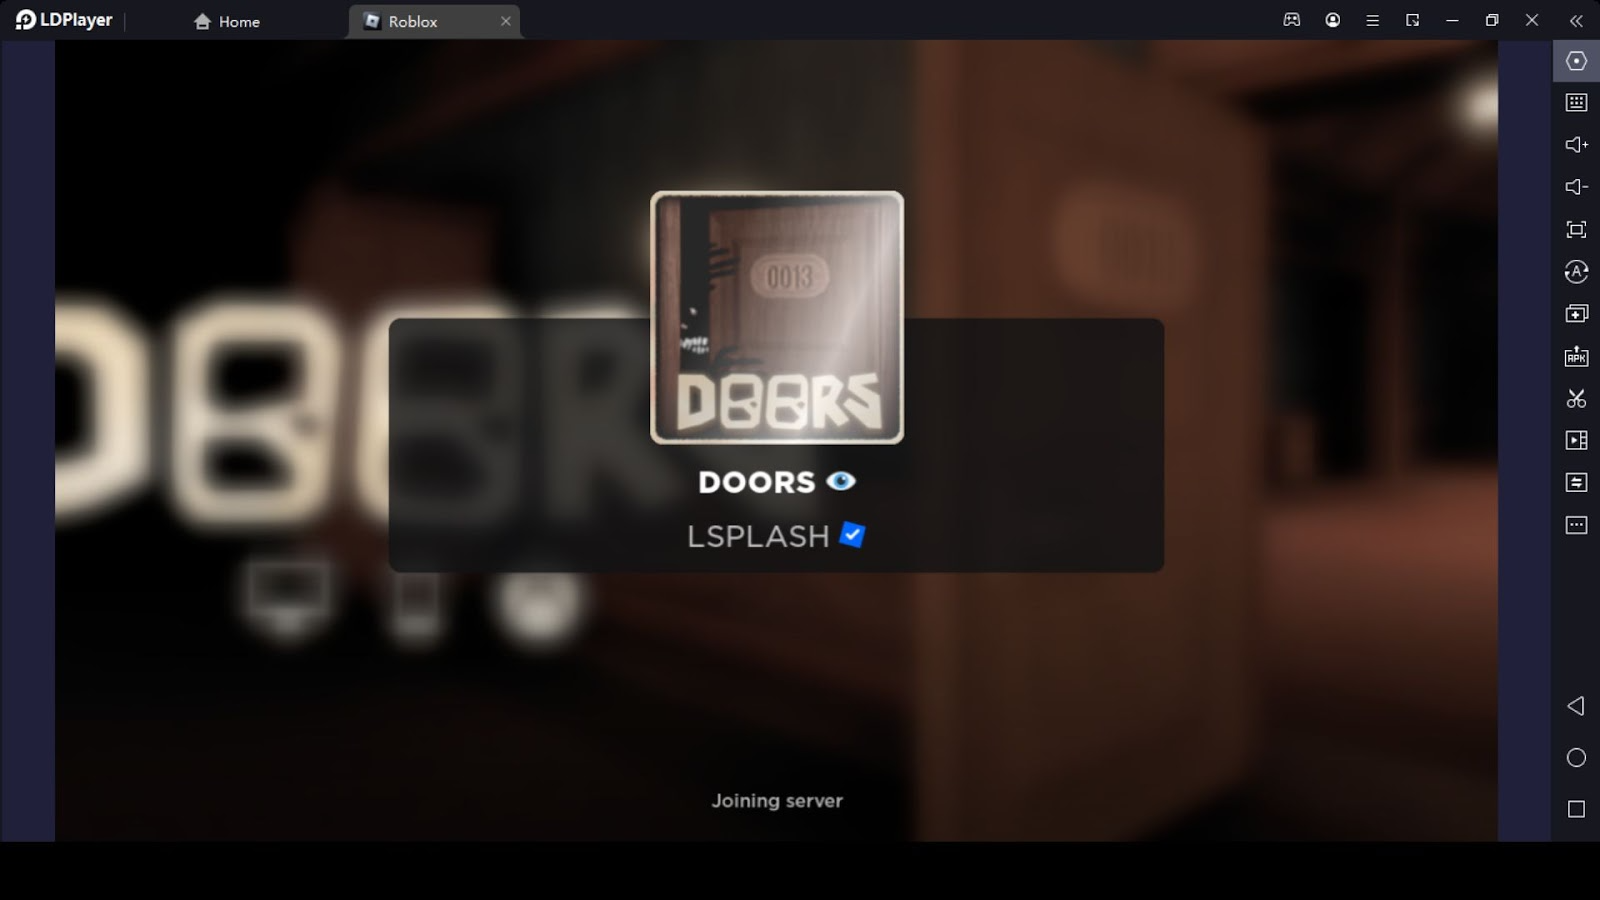 NEW* WORKING ALL CODES FOR DOORS IN 2023 SEPTEMBER! ROBLOX DOORS CODES 